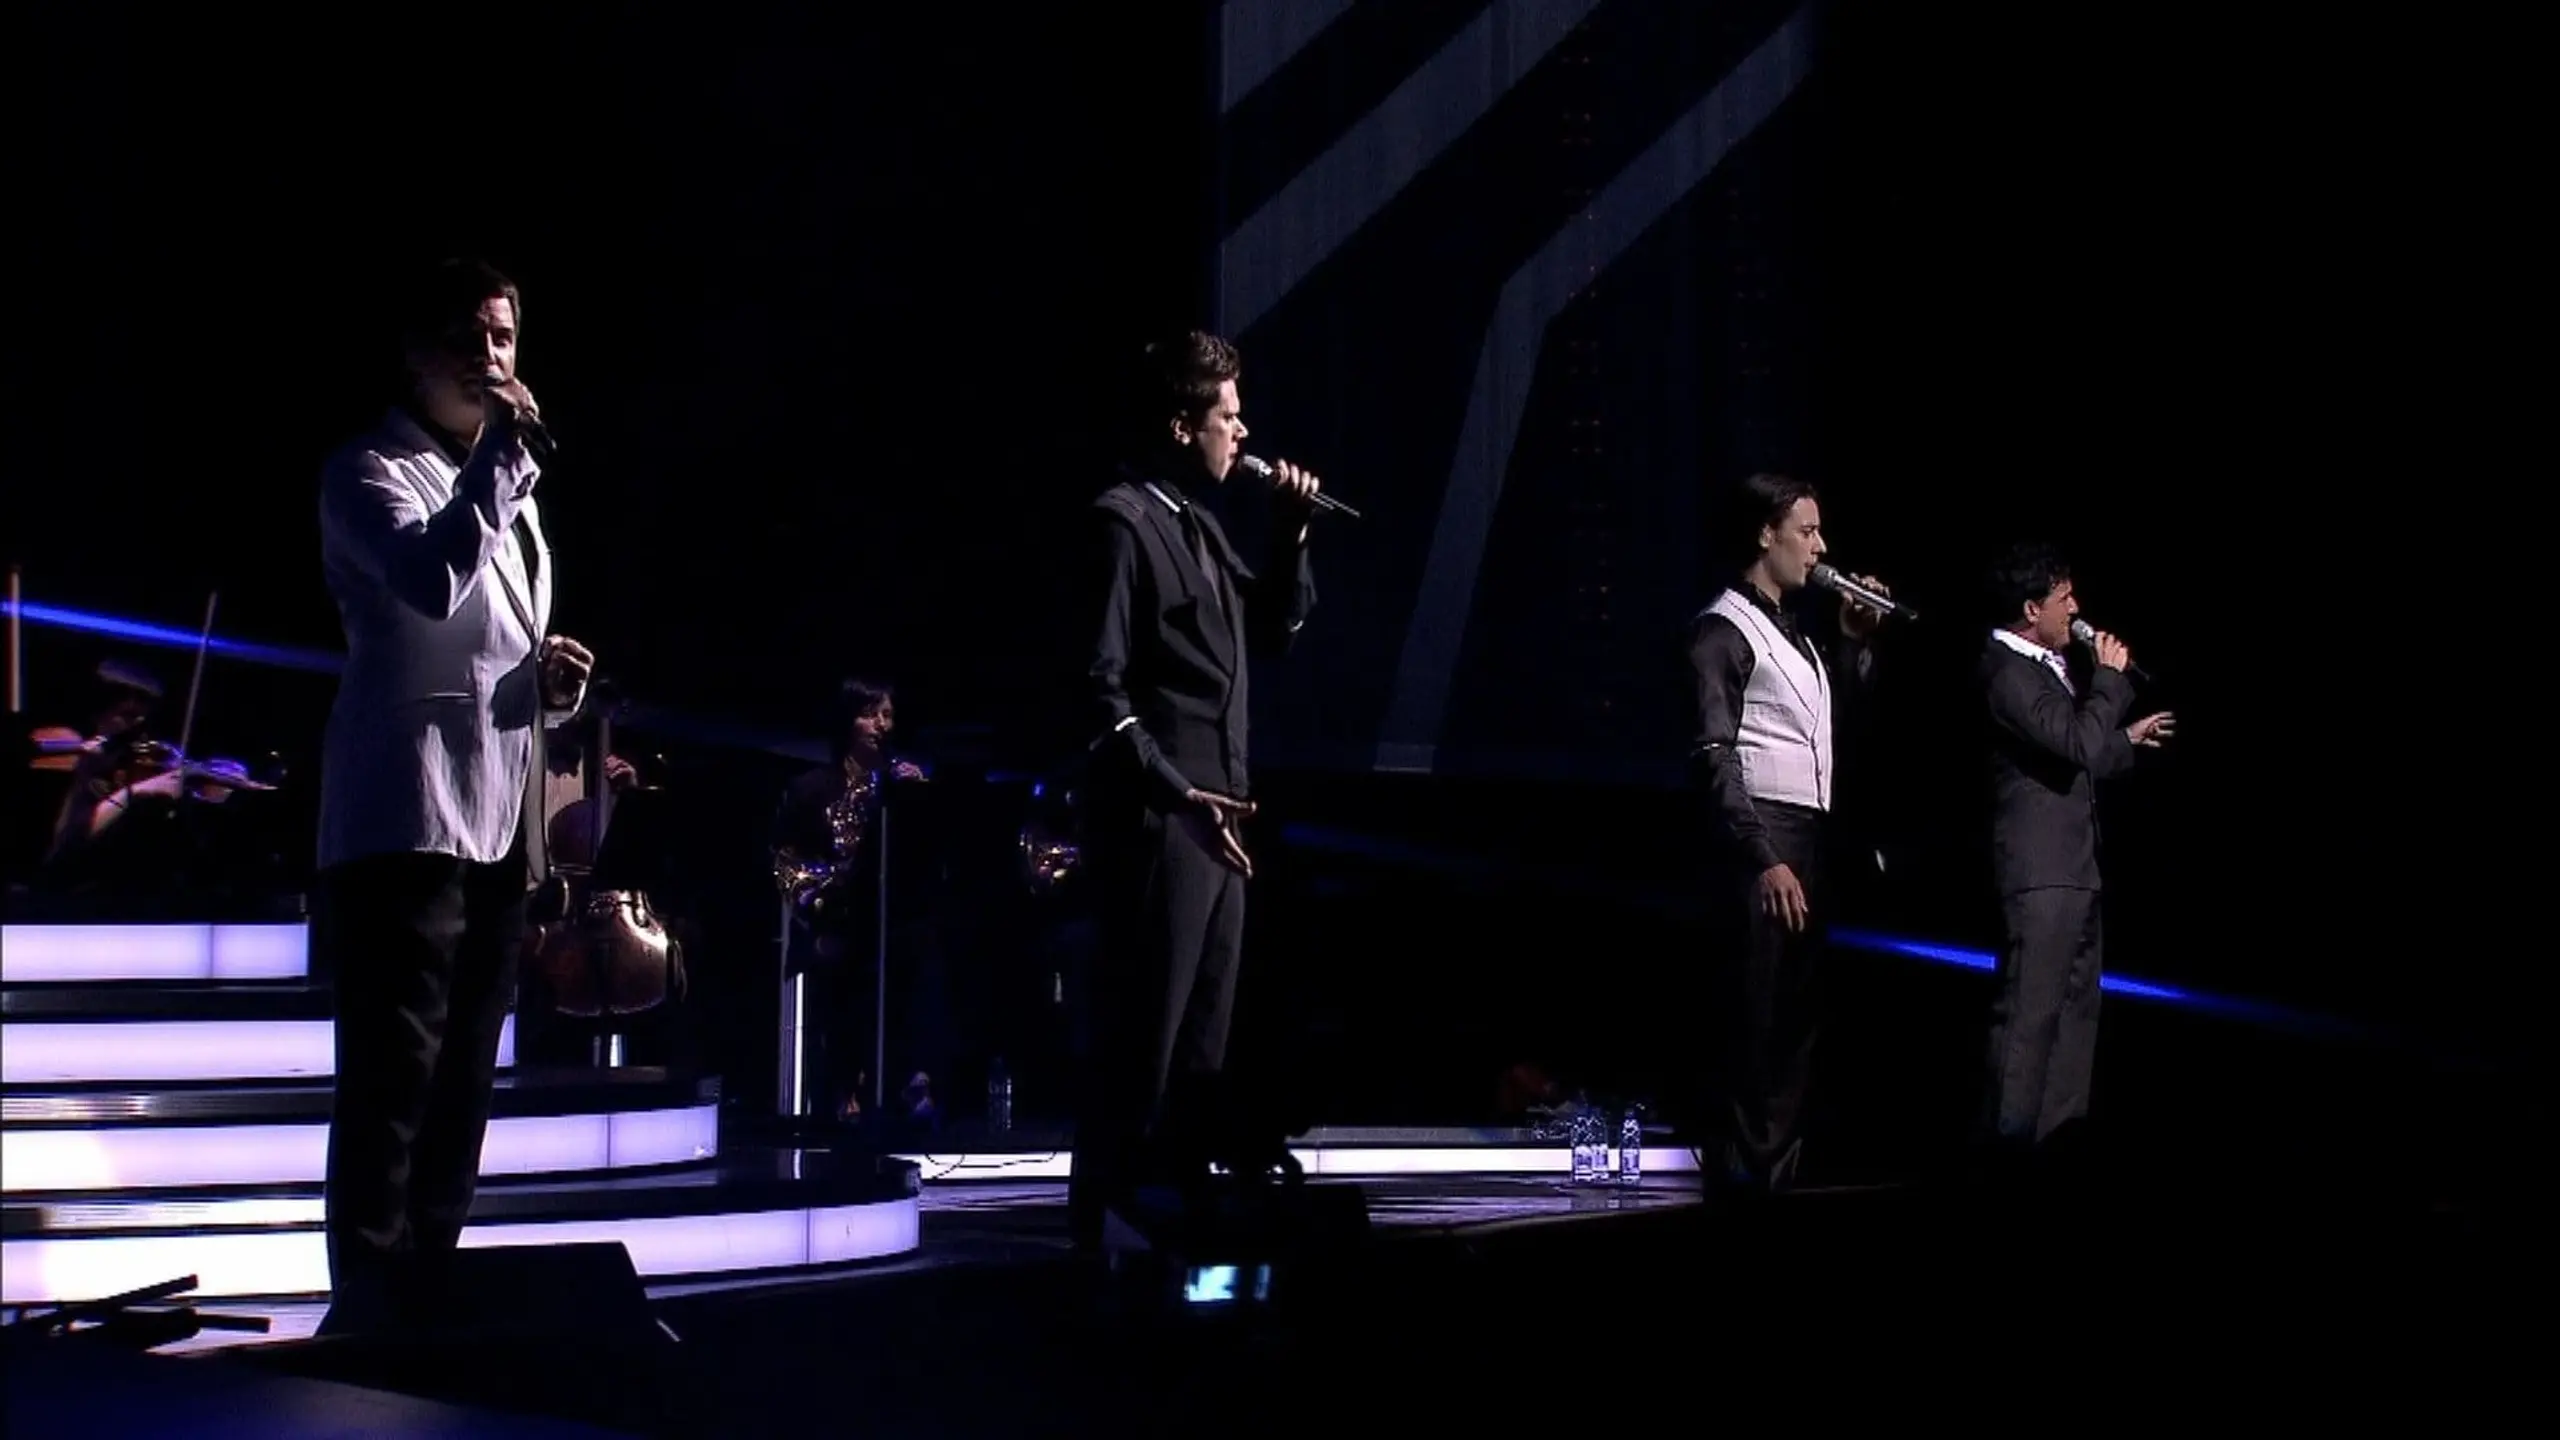 Il Divo - An Evening With Il Divo - Live In Barcelona